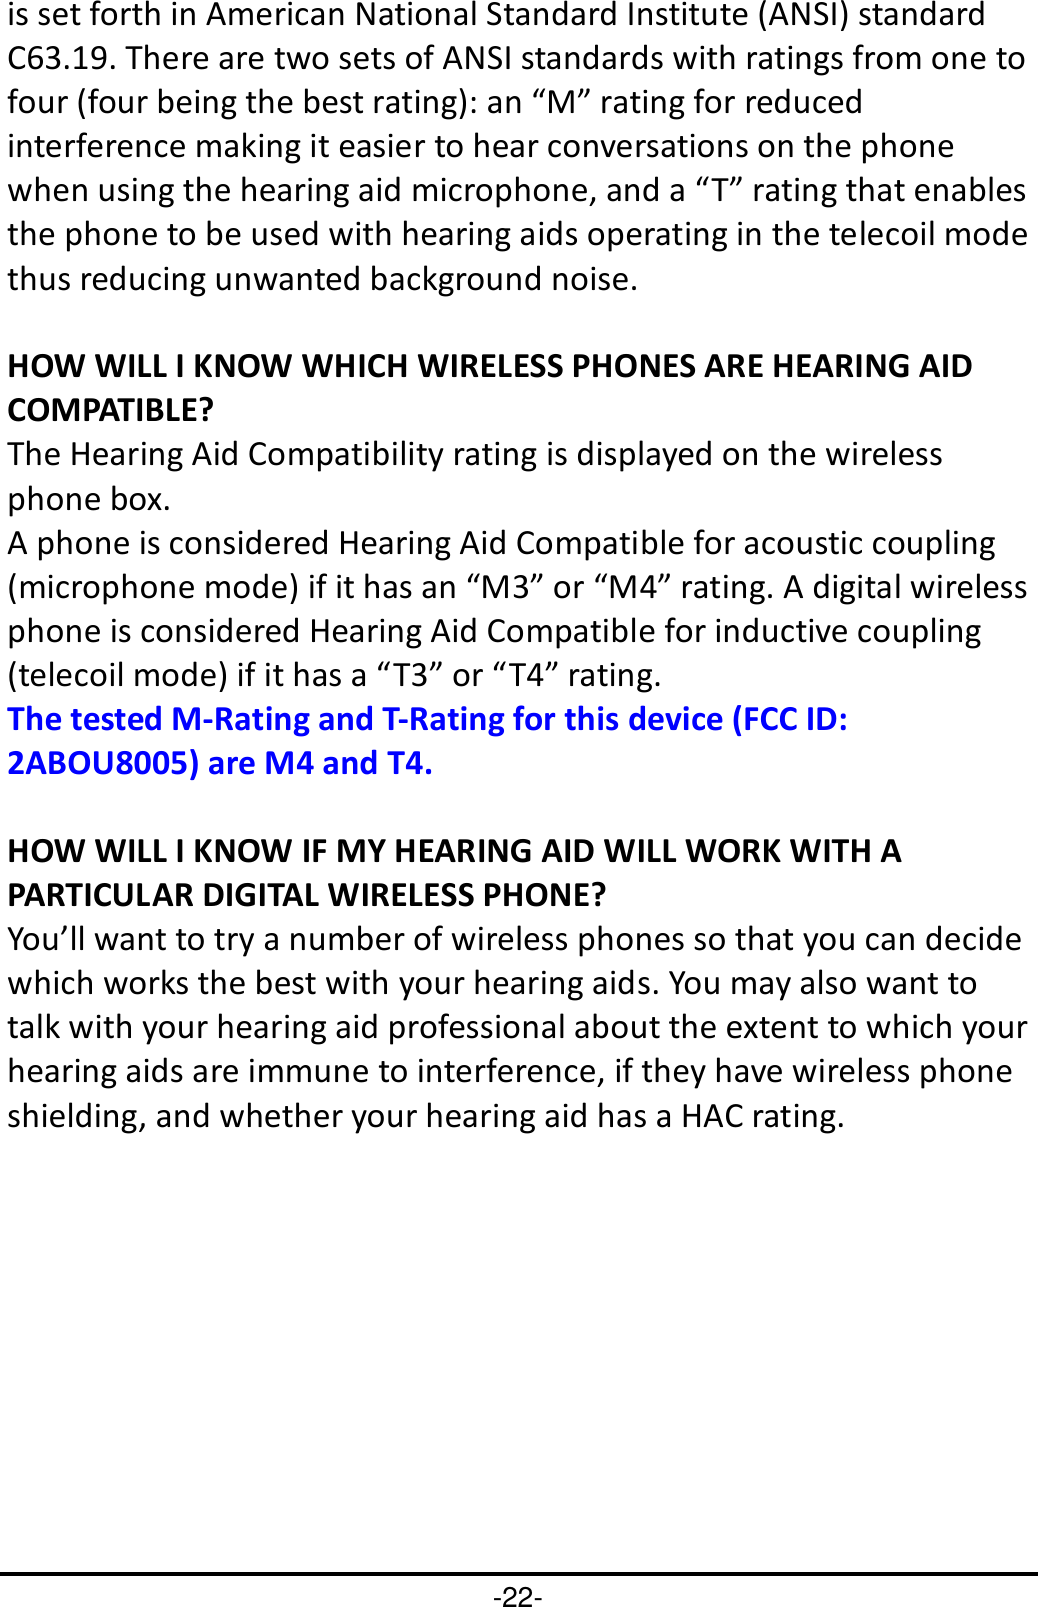 -22- is set forth in American National Standard Institute (ANSI) standard C63.19. There are two sets of ANSI standards with ratings from one to four (four being the best rating): an “M” rating for reduced interference making it easier to hear conversations on the phone when using the hearing aid microphone, and a “T” rating that enables the phone to be used with hearing aids operating in the telecoil mode thus reducing unwanted background noise.  HOW WILL I KNOW WHICH WIRELESS PHONES ARE HEARING AID COMPATIBLE? The Hearing Aid Compatibility rating is displayed on the wireless phone box. A phone is considered Hearing Aid Compatible for acoustic coupling (microphone mode) if it has an “M3” or “M4” rating. A digital wireless phone is considered Hearing Aid Compatible for inductive coupling (telecoil mode) if it has a “T3” or “T4” rating. The tested M-Rating and T-Rating for this device (FCC ID: 2ABOU8005) are M4 and T4.  HOW WILL I KNOW IF MY HEARING AID WILL WORK WITH A PARTICULAR DIGITAL WIRELESS PHONE? You’ll want to try a number of wireless phones so that you can decide which works the best with your hearing aids. You may also want to talk with your hearing aid professional about the extent to which your hearing aids are immune to interference, if they have wireless phone shielding, and whether your hearing aid has a HAC rating.  